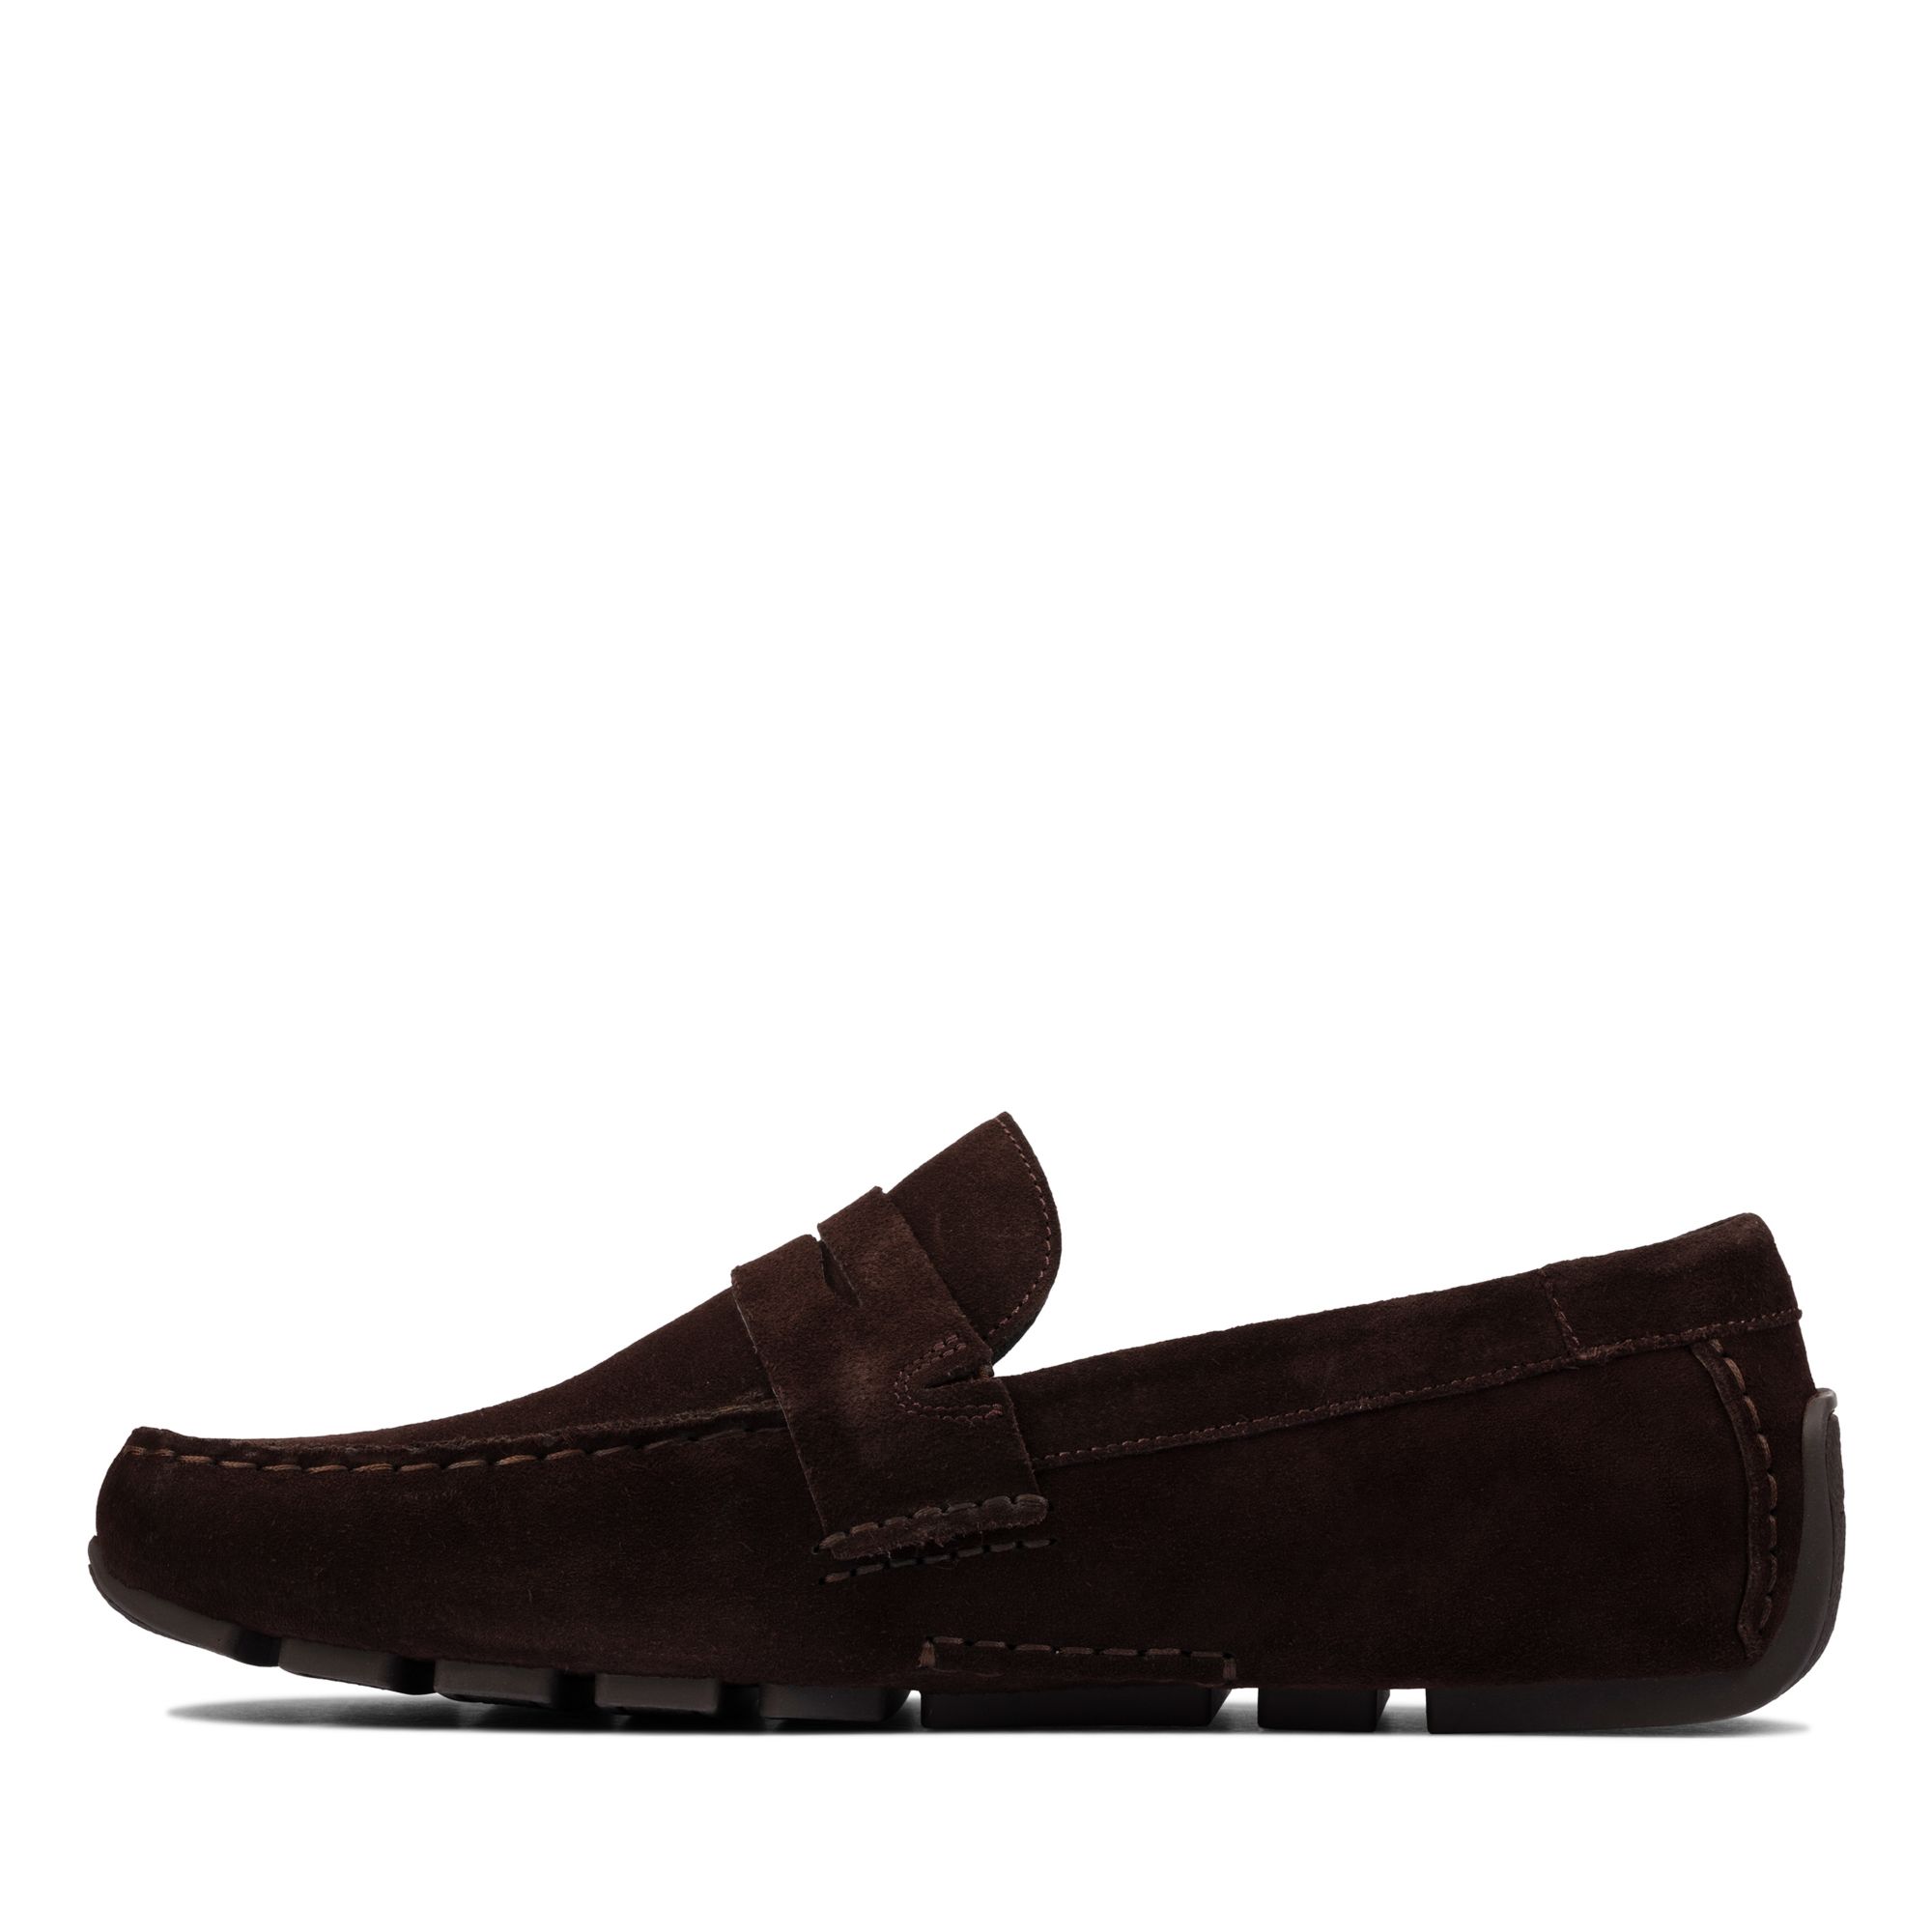 Clarks Oswick Penny Loafers, Dark Brown Suede, 43